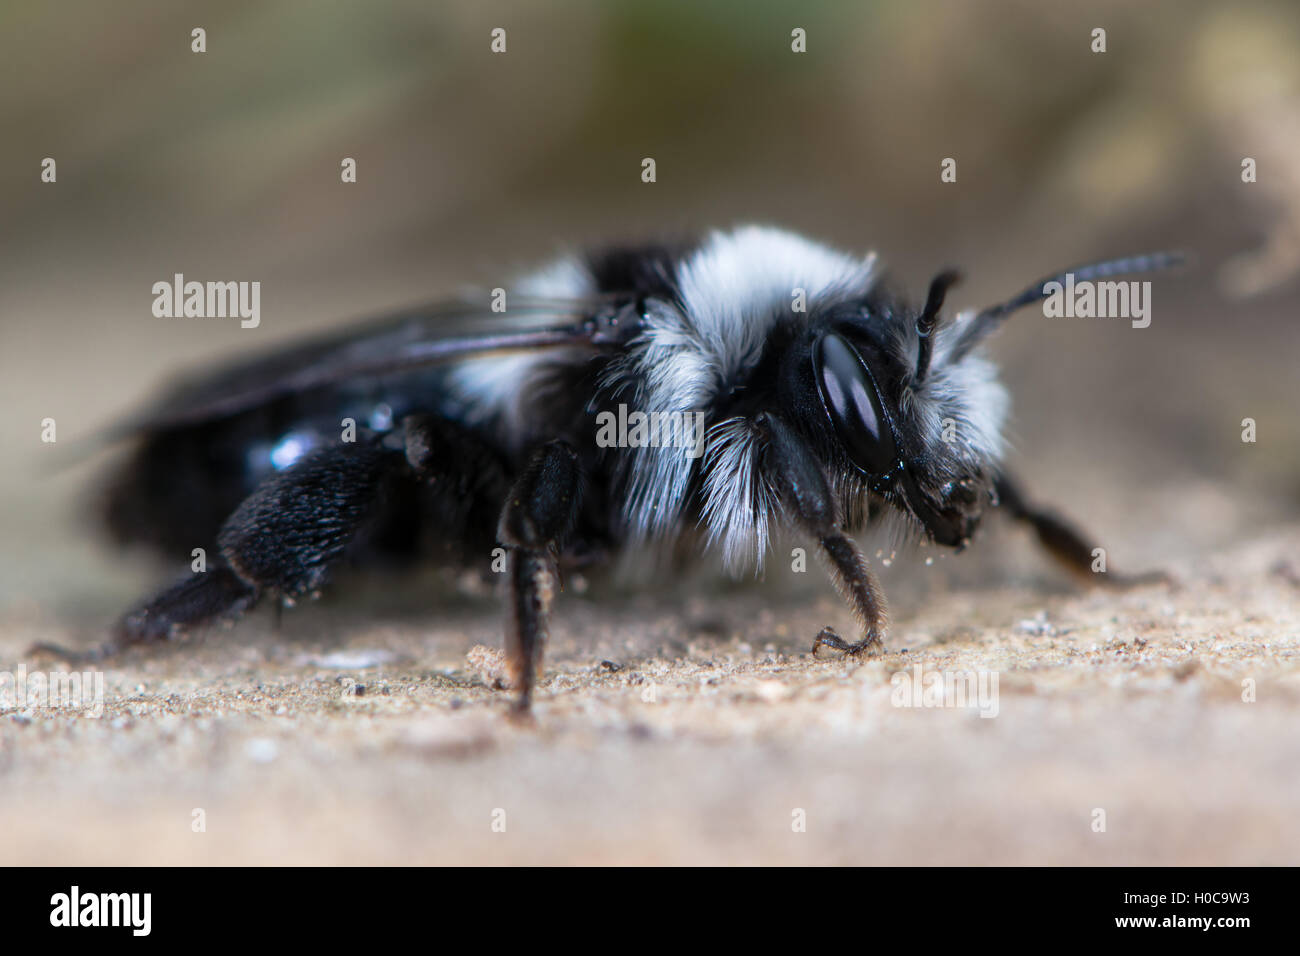 Second generation ashy mining bee (Andrena cineria). Female insect in the family Andrenidae, showing long black and white hair Stock Photo